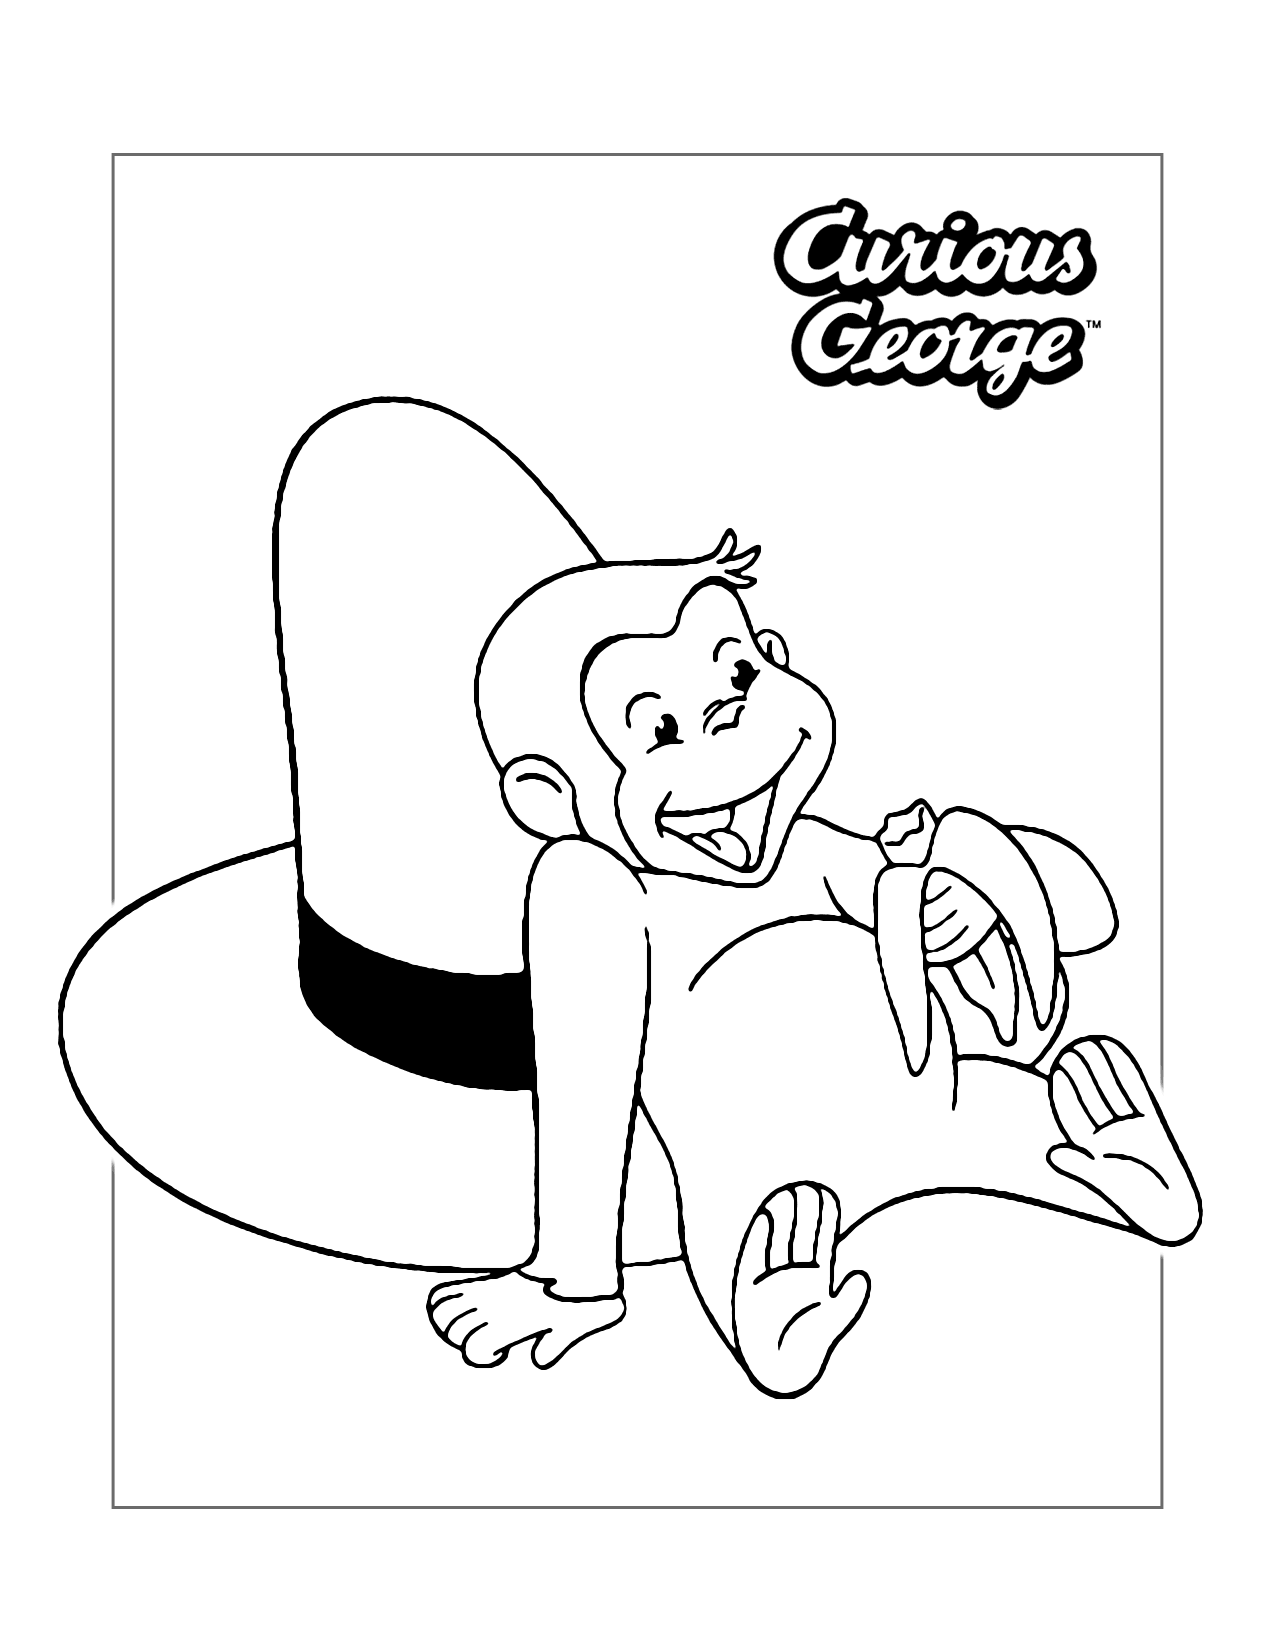 Curious George And The Yellow Hat Coloring Page